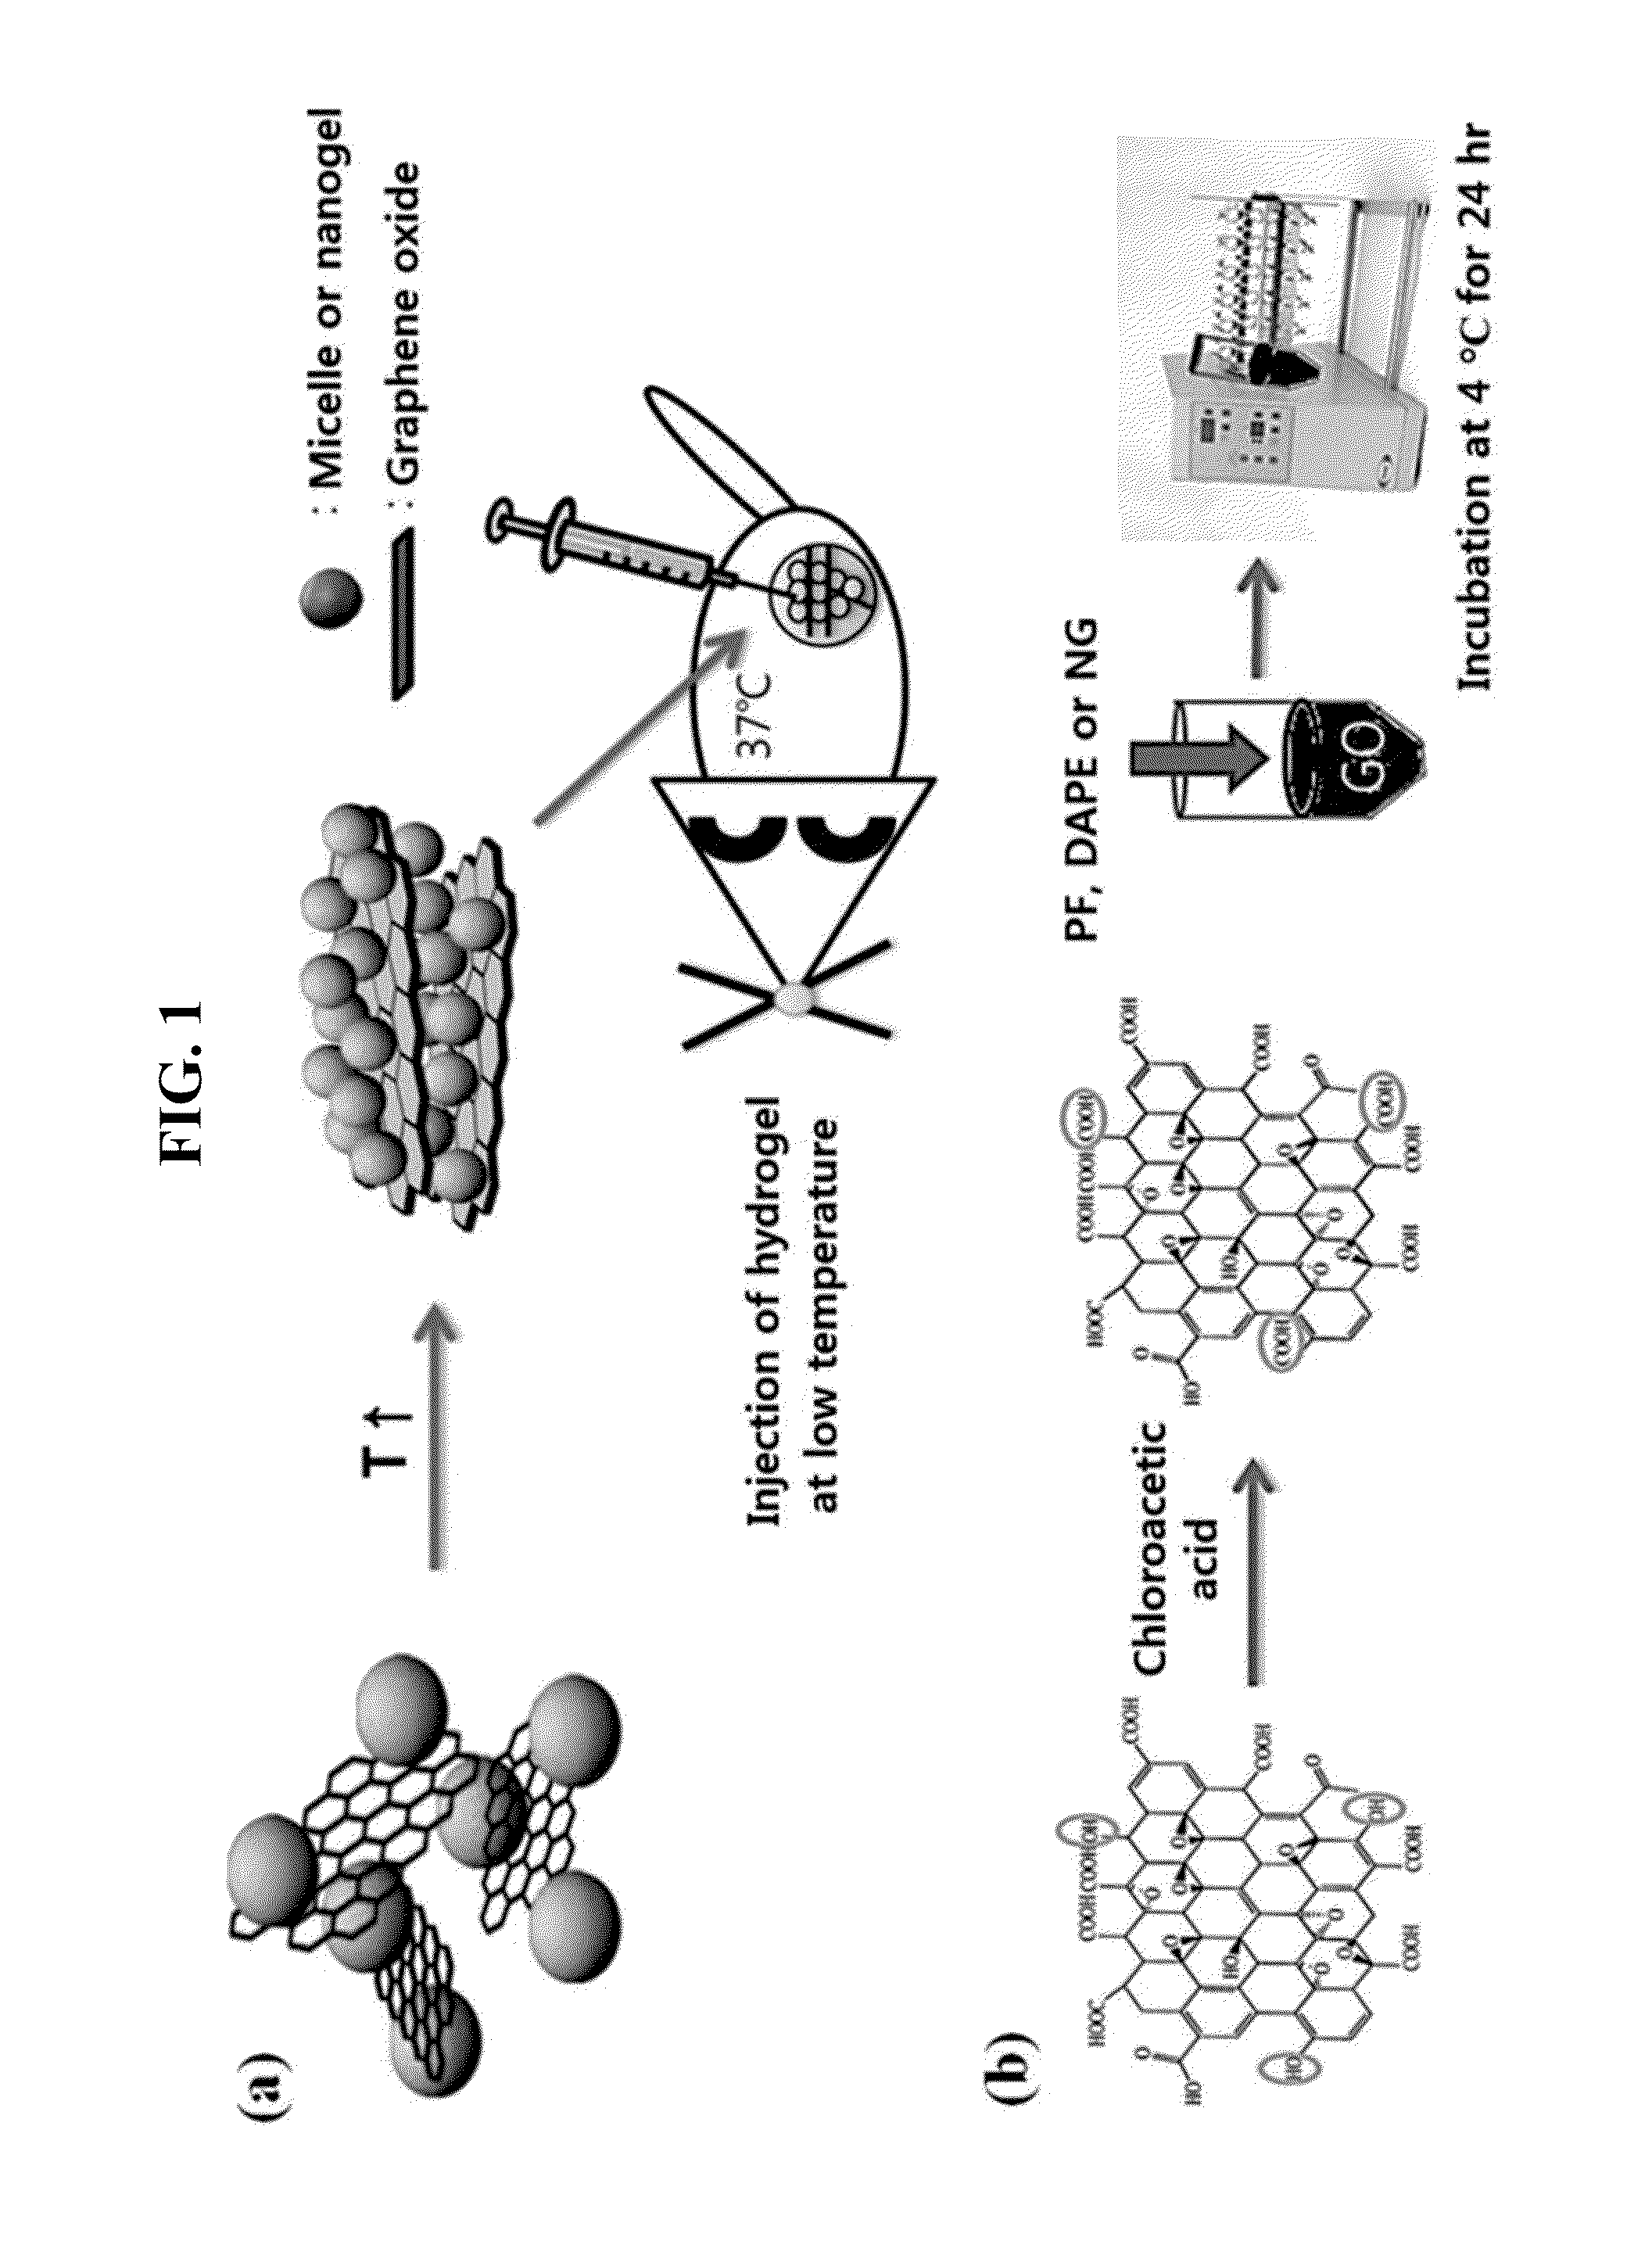 Composition for forming pluronic-based hydrogel with improved stability